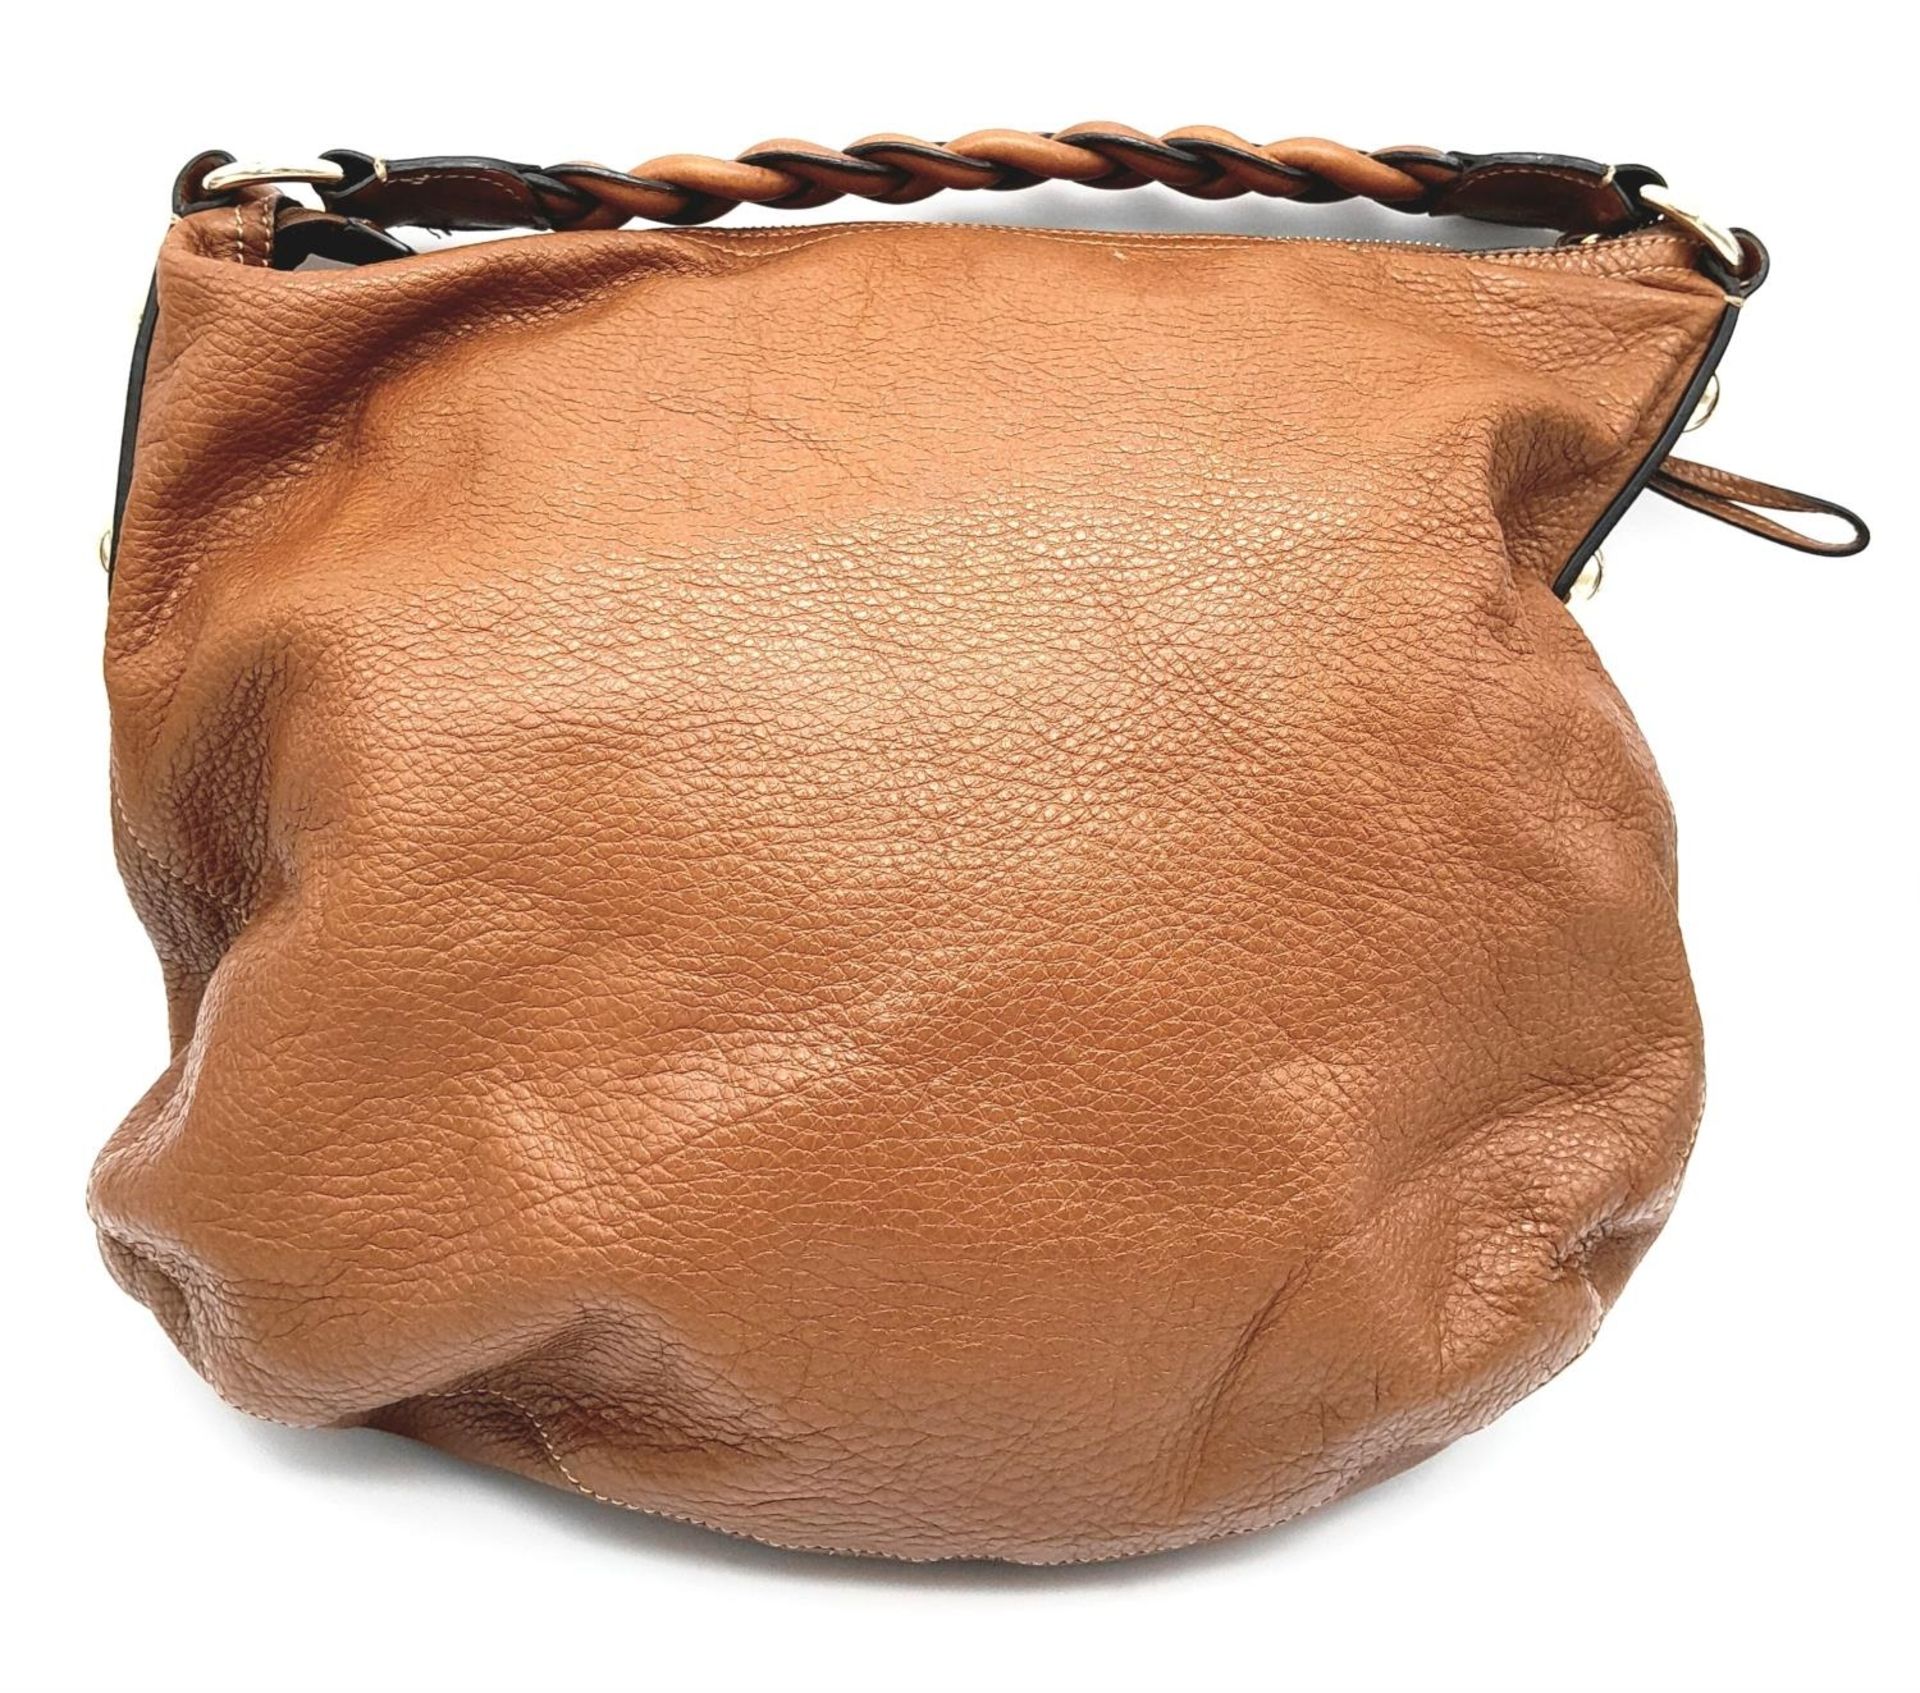 A Mulberry Tan Daria Hobo Bag. Leather exterior with gold-toned hardware, braided strap and zip - Image 5 of 8